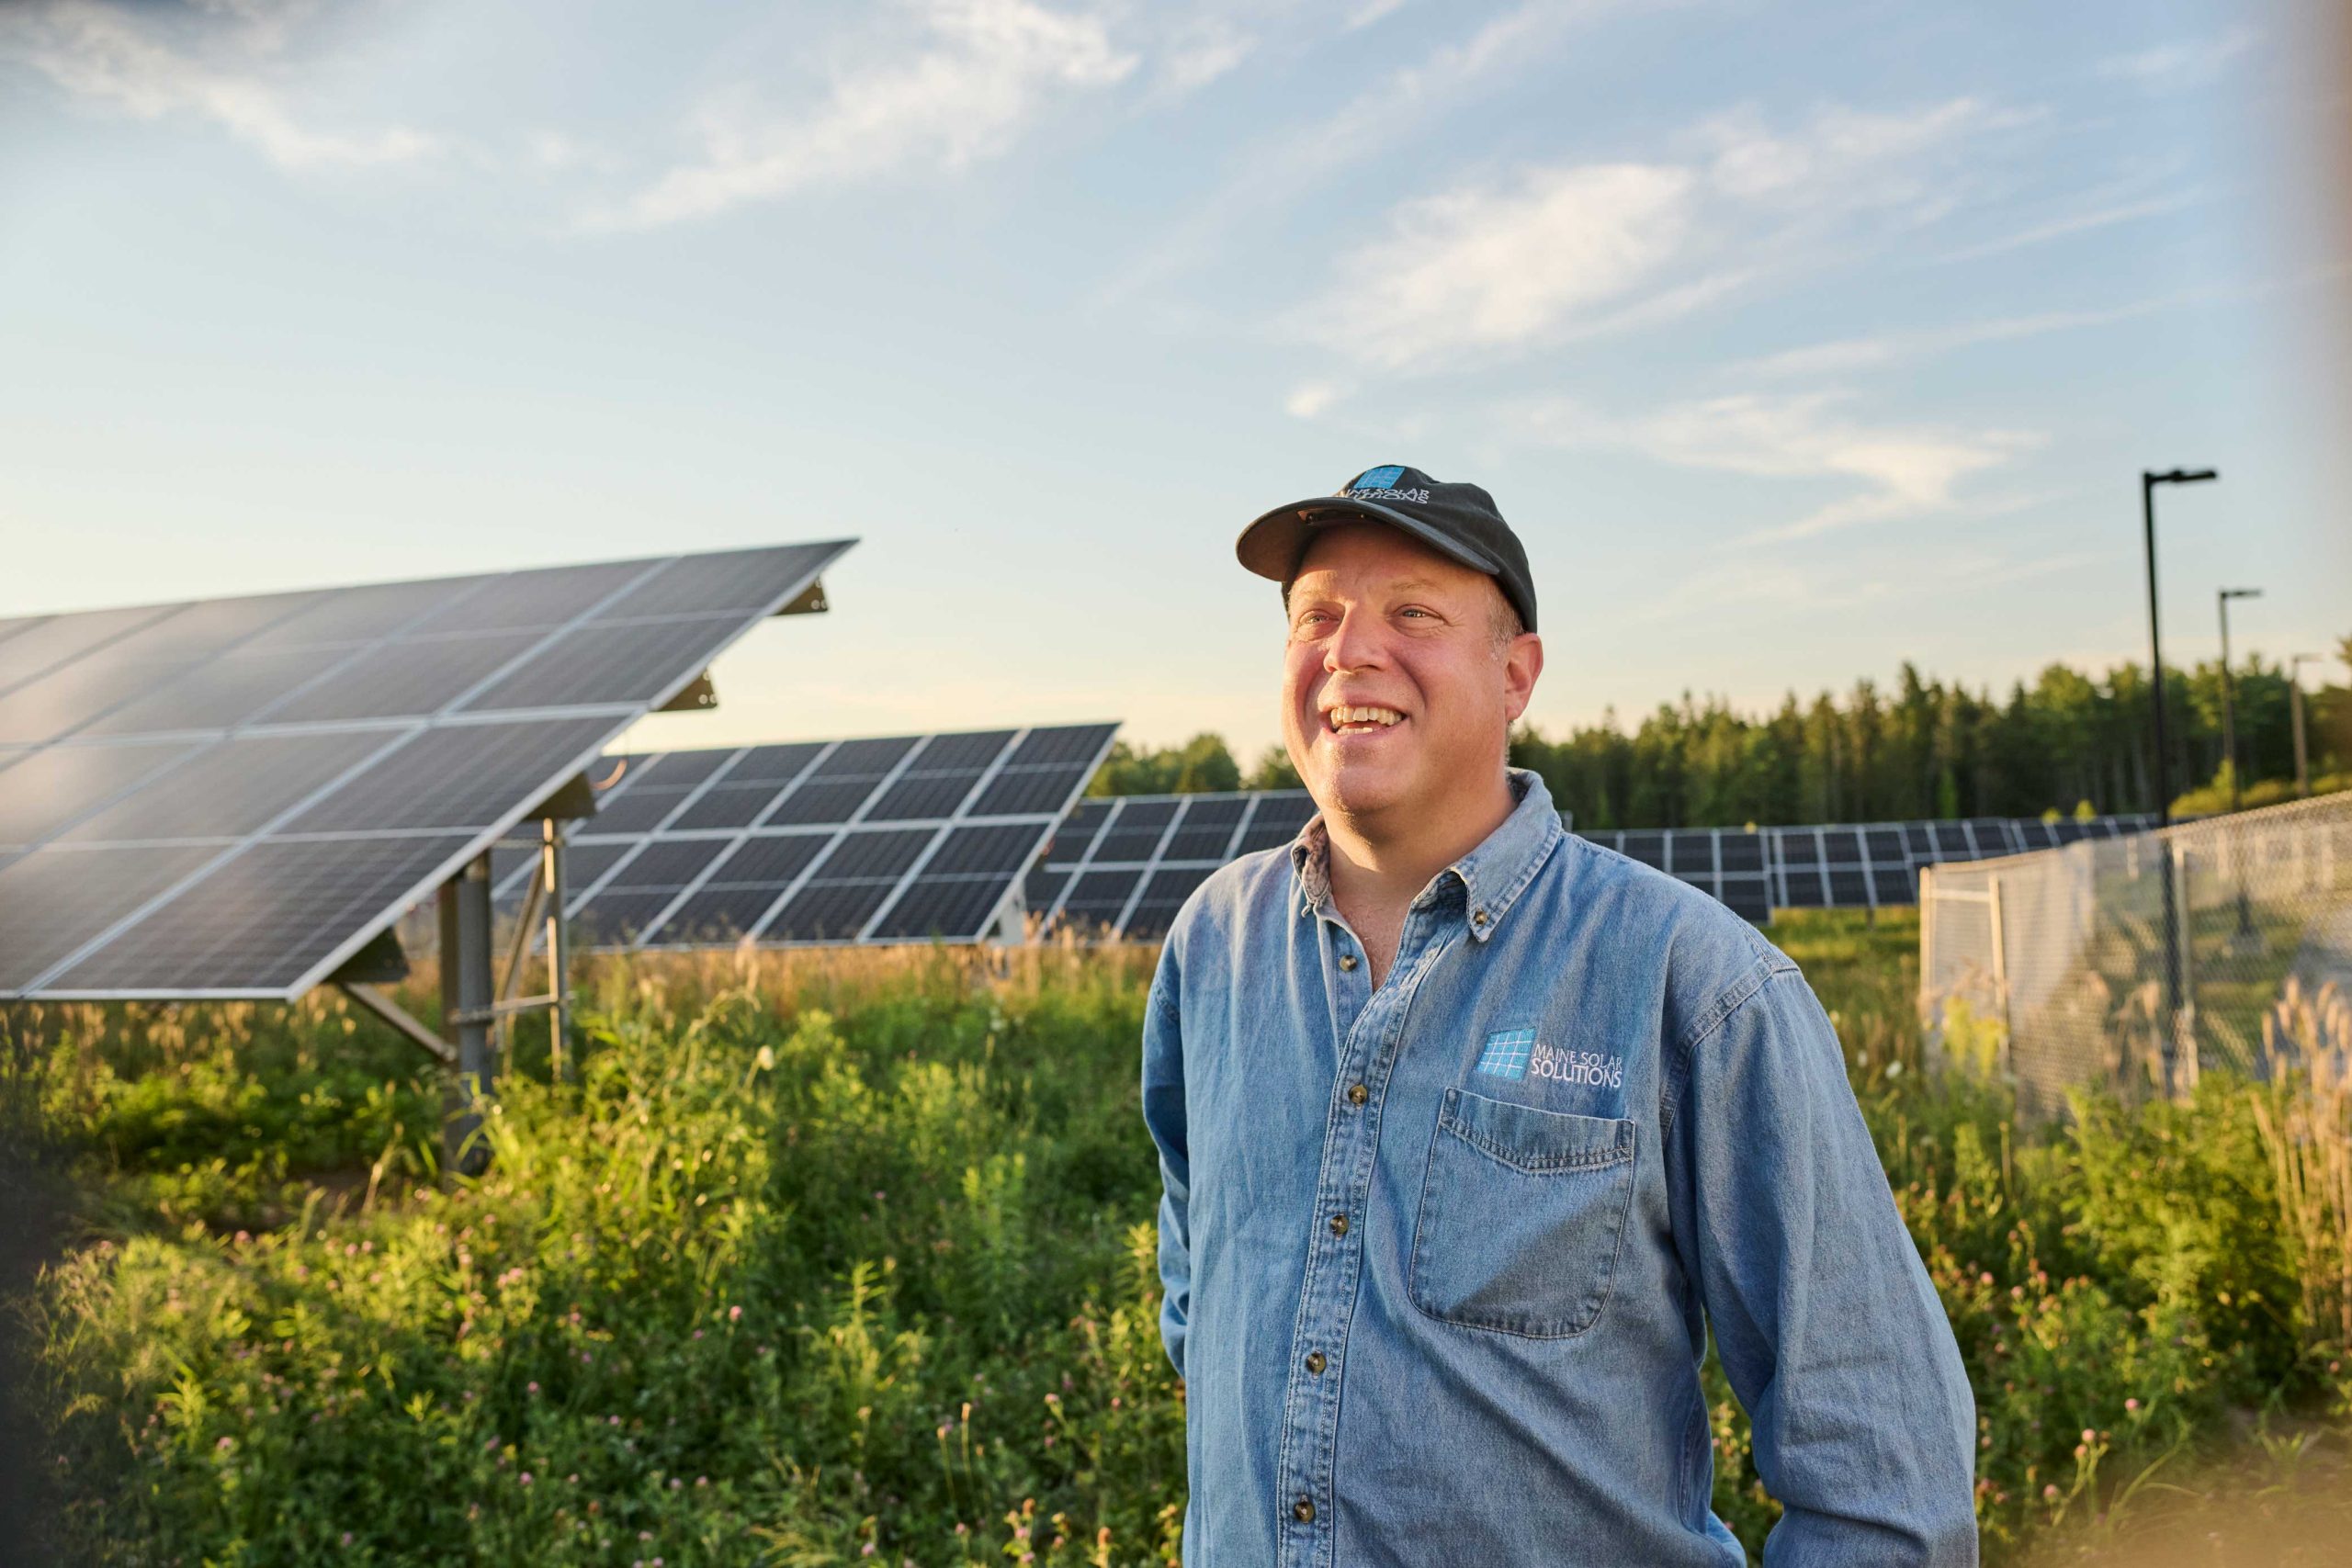 Man standing in front of solar farm with a big smile.